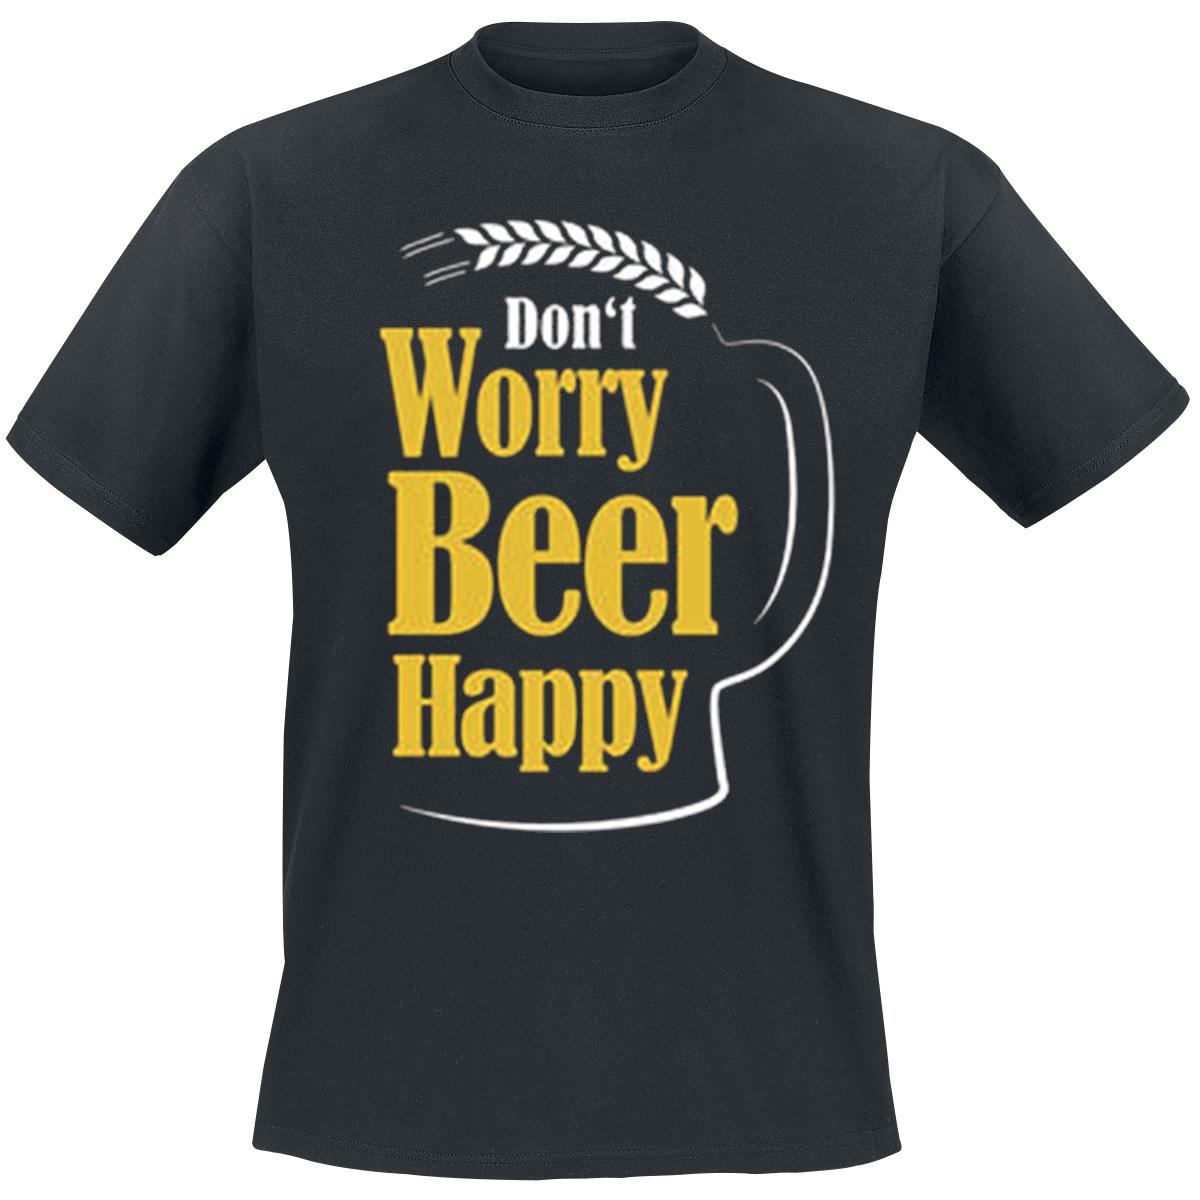 Don't Worry Beer Happy T-shirt Design